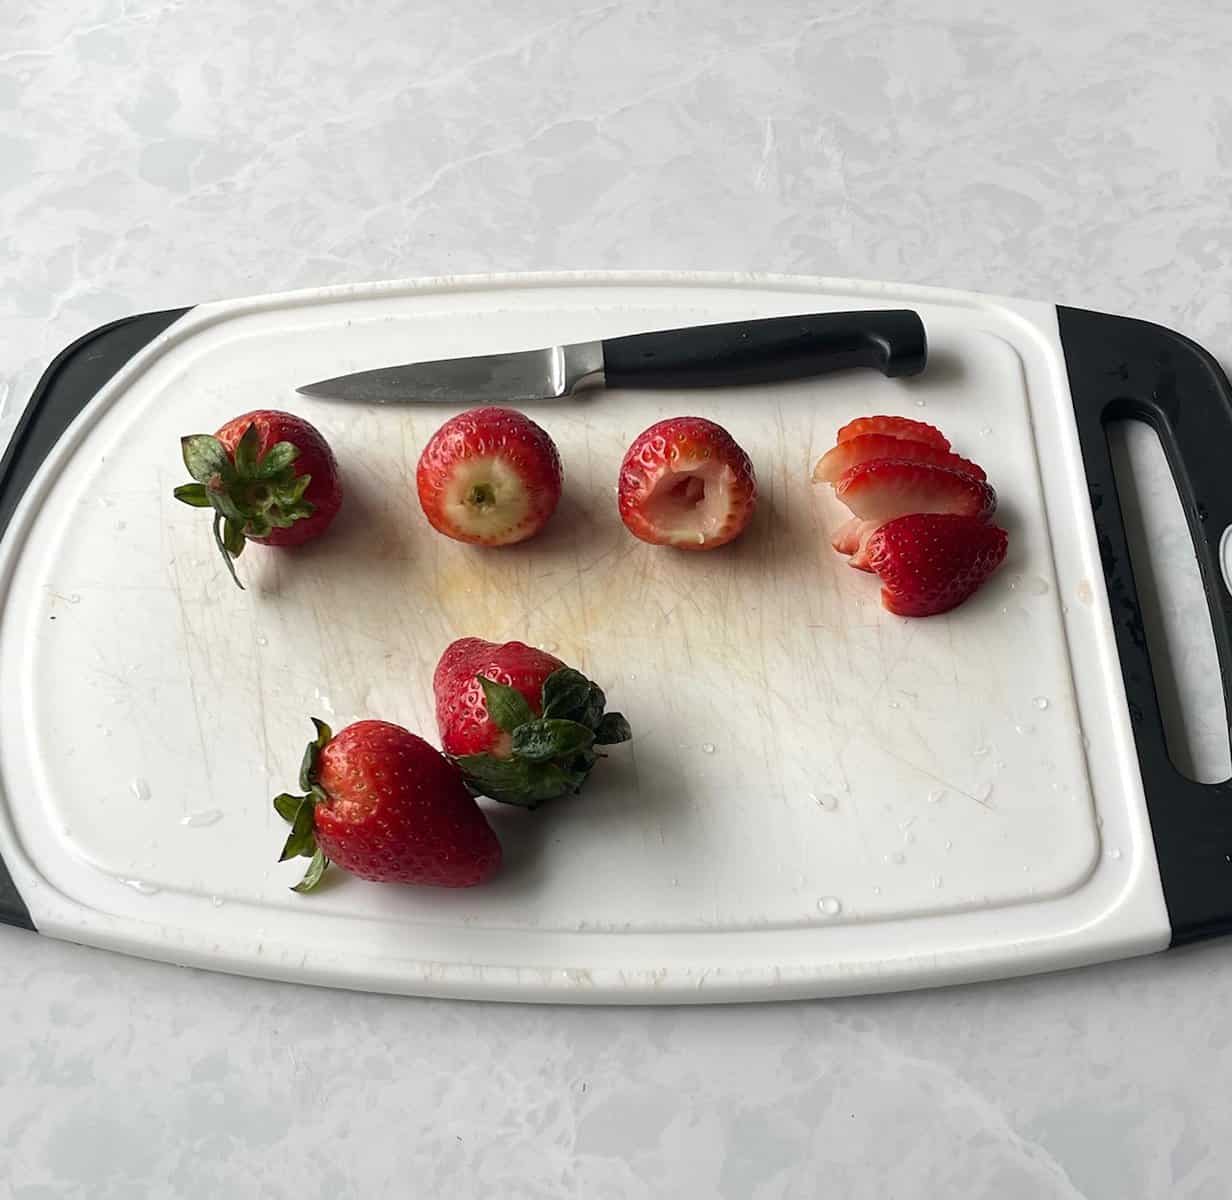 strawberries on a cutting board, illustrating the steps how to hull and slice strawberries.